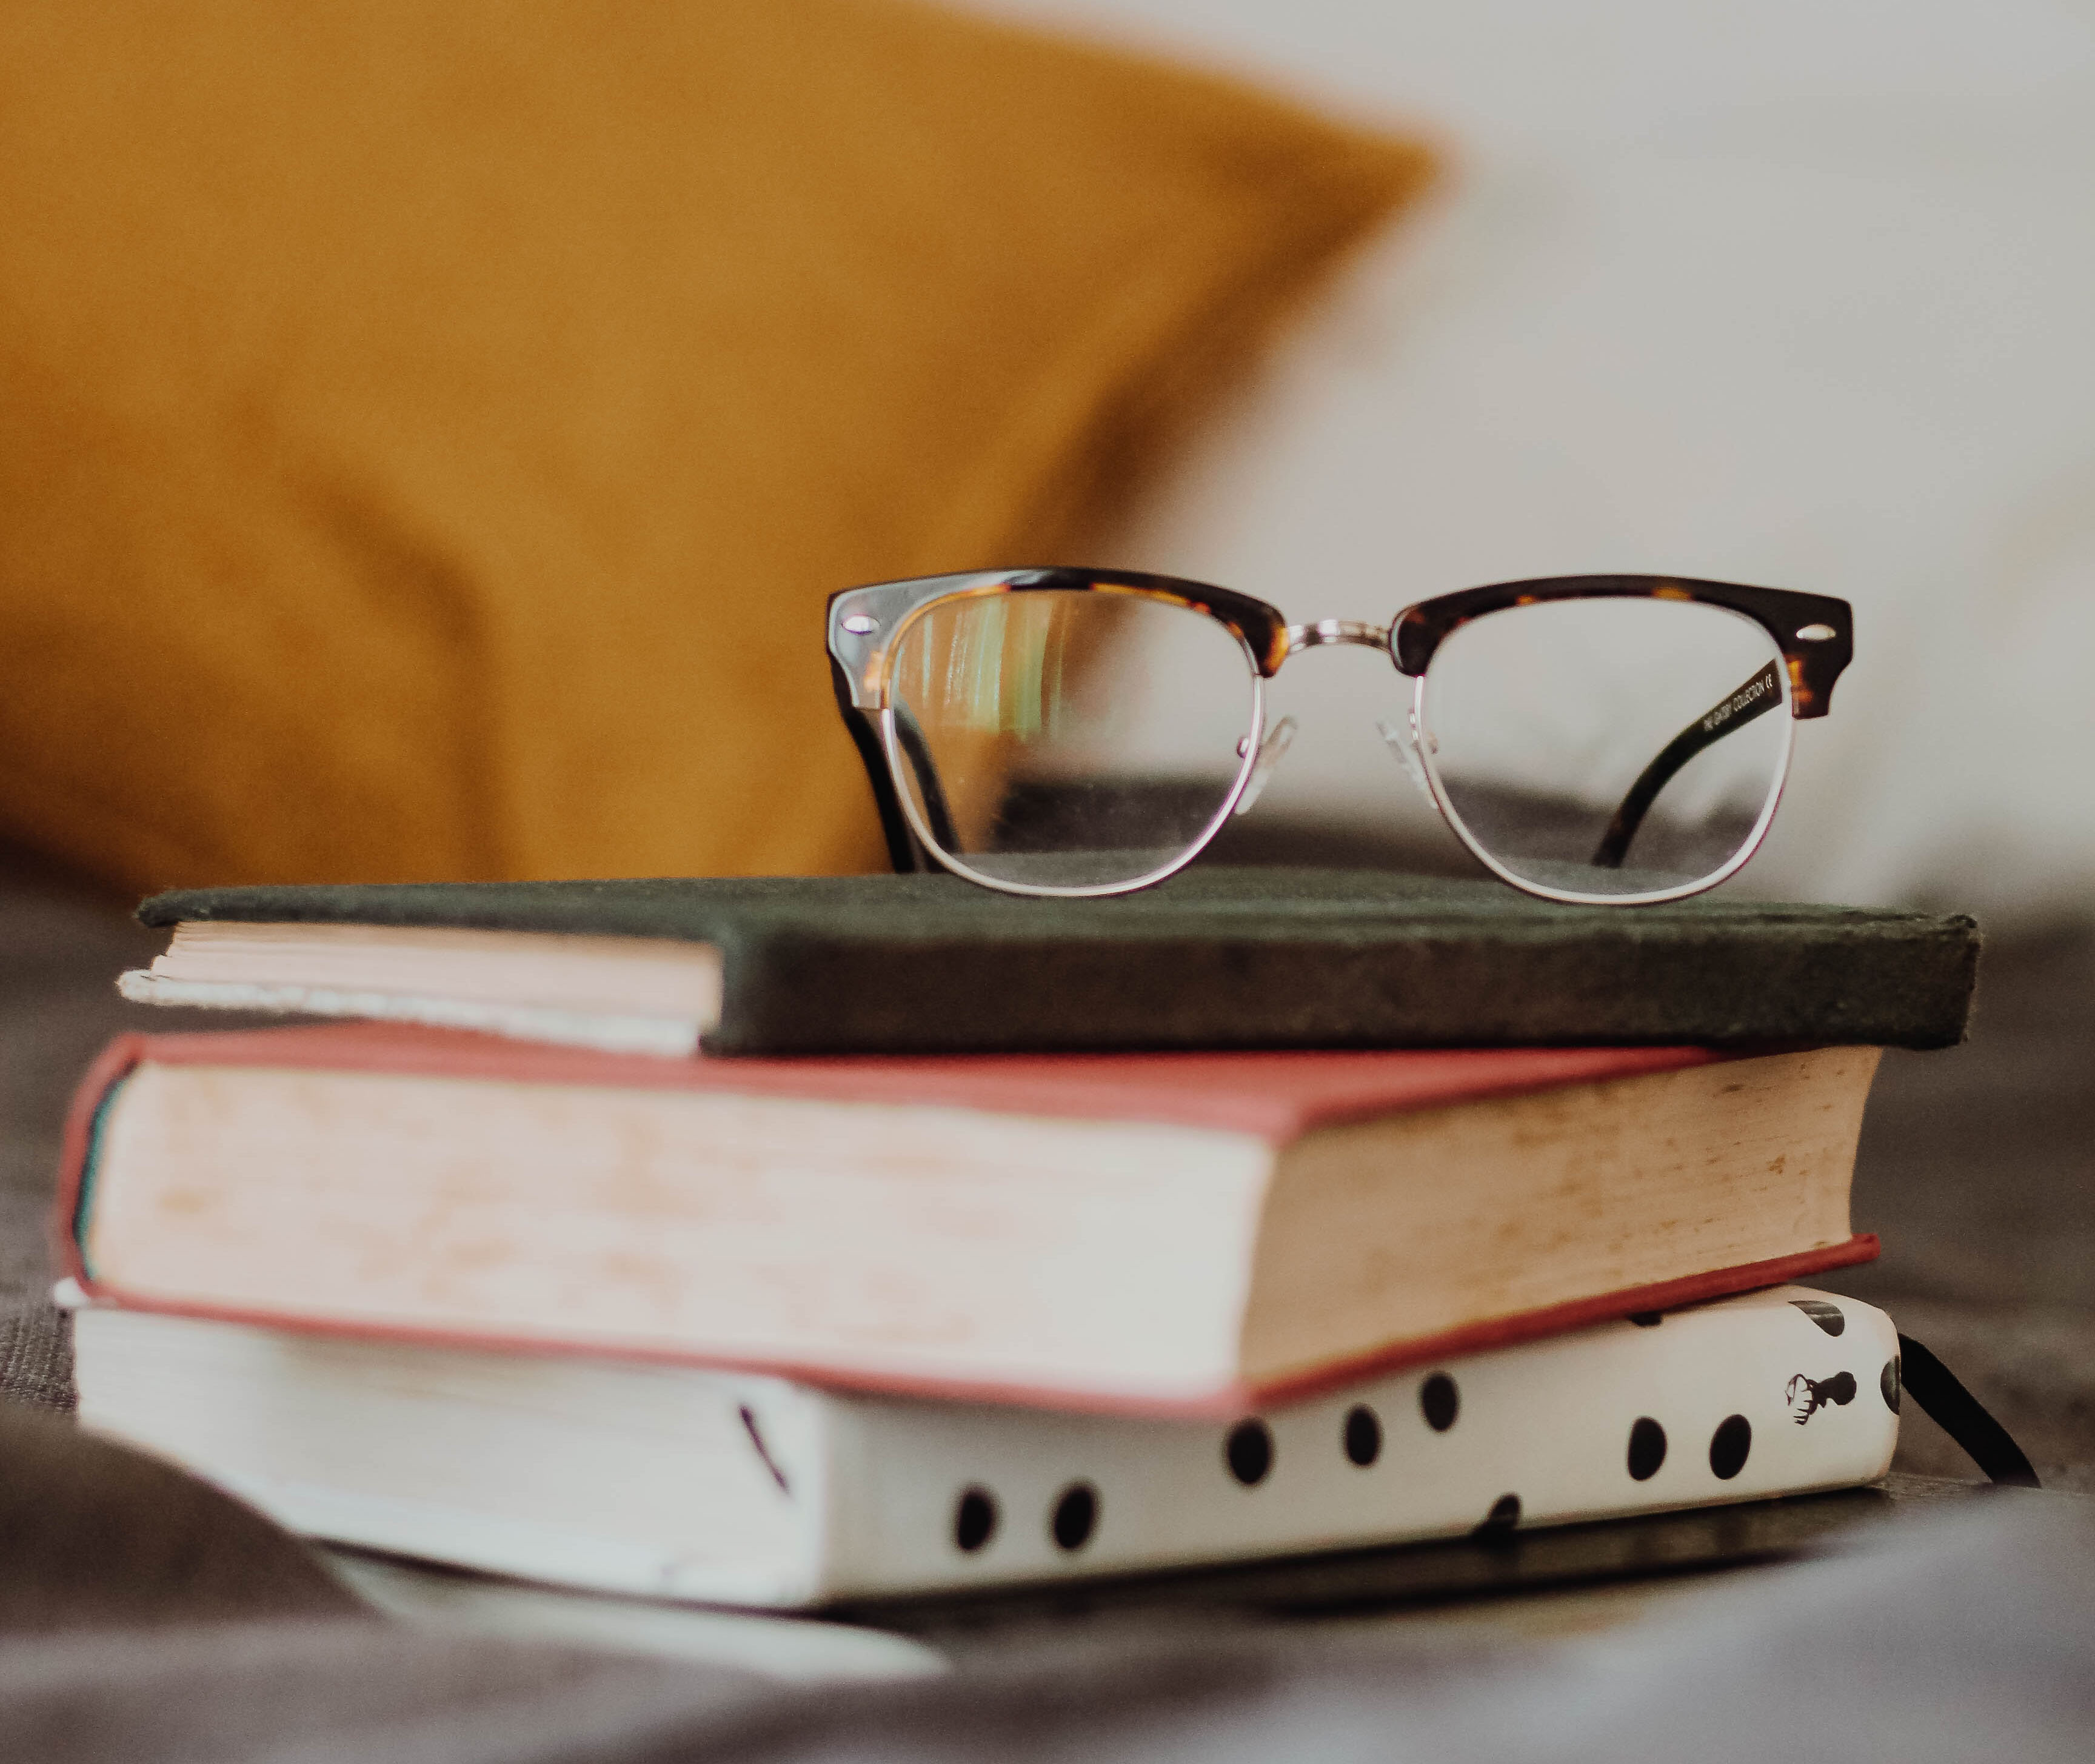 A pair of glasses are placed on top of several books